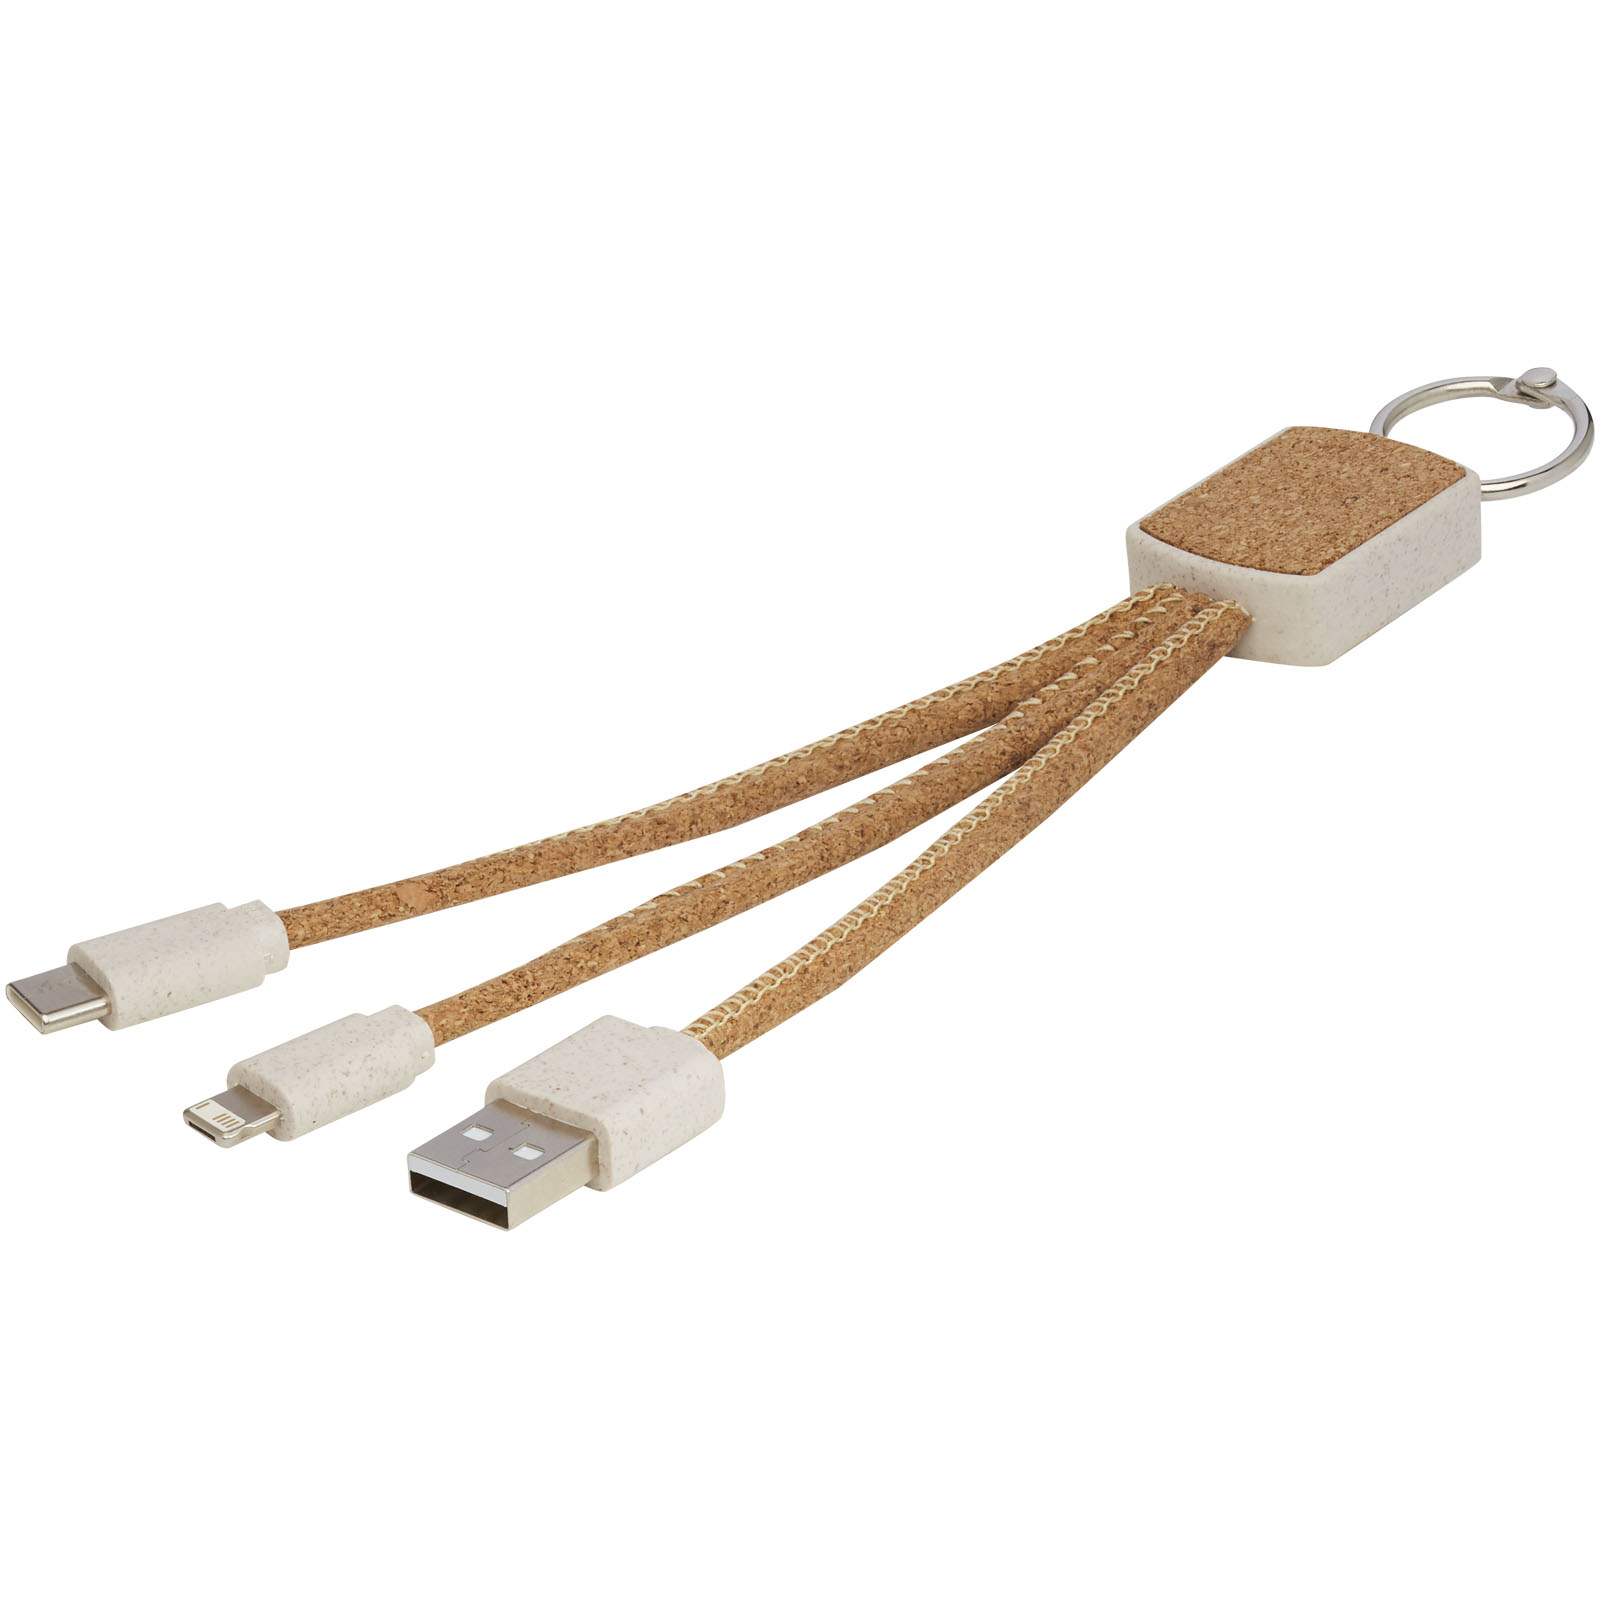 Power USB cable 3in1 BATES made of wheat straw and cork - natural